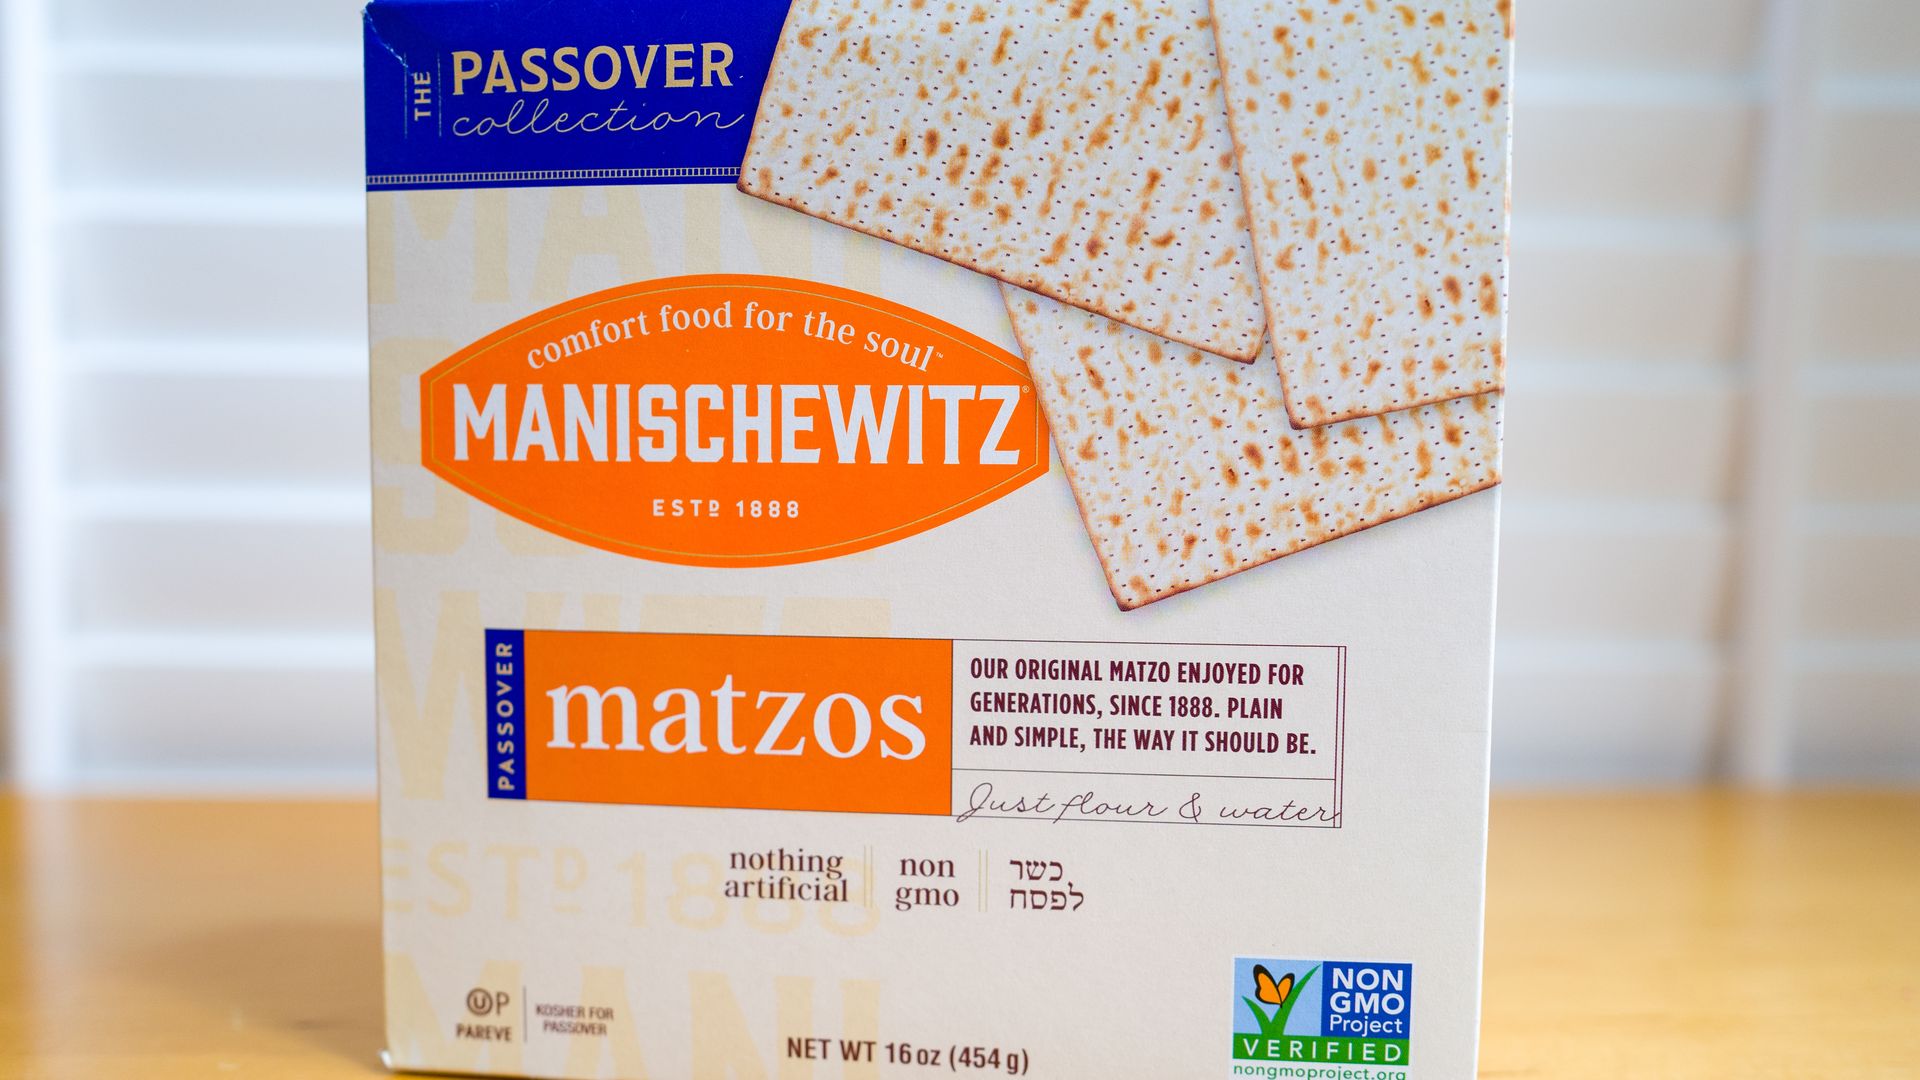 Close-up of a box of Kosher for Passover Matzos bread from Manischewitz